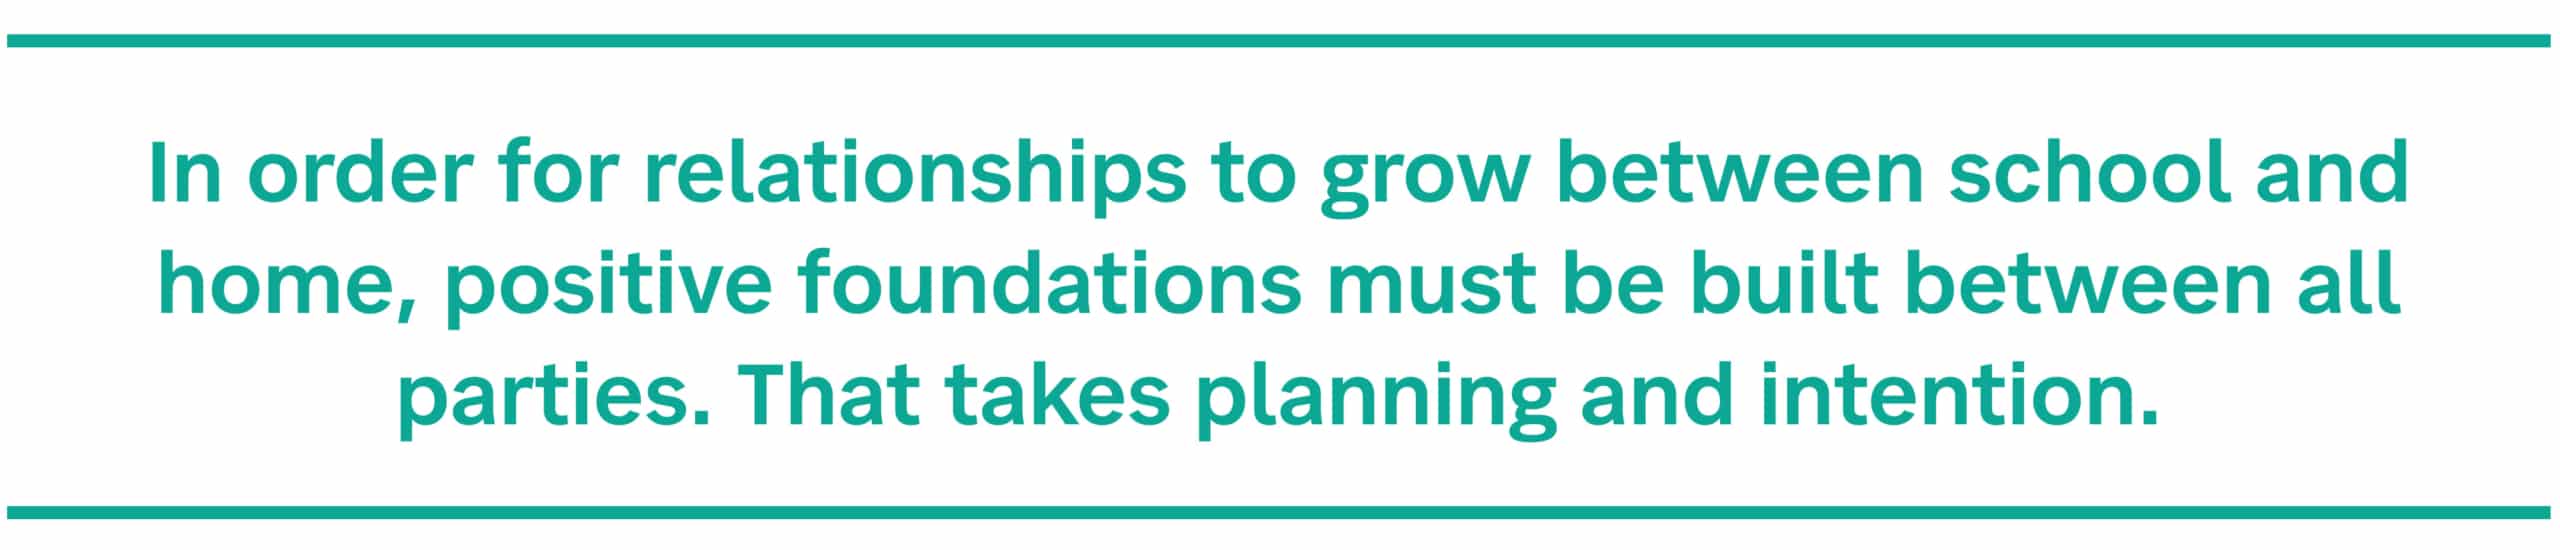 In order for relationships to grow between school and home, positive foundations must be built between all parties. That takes planning and intention.